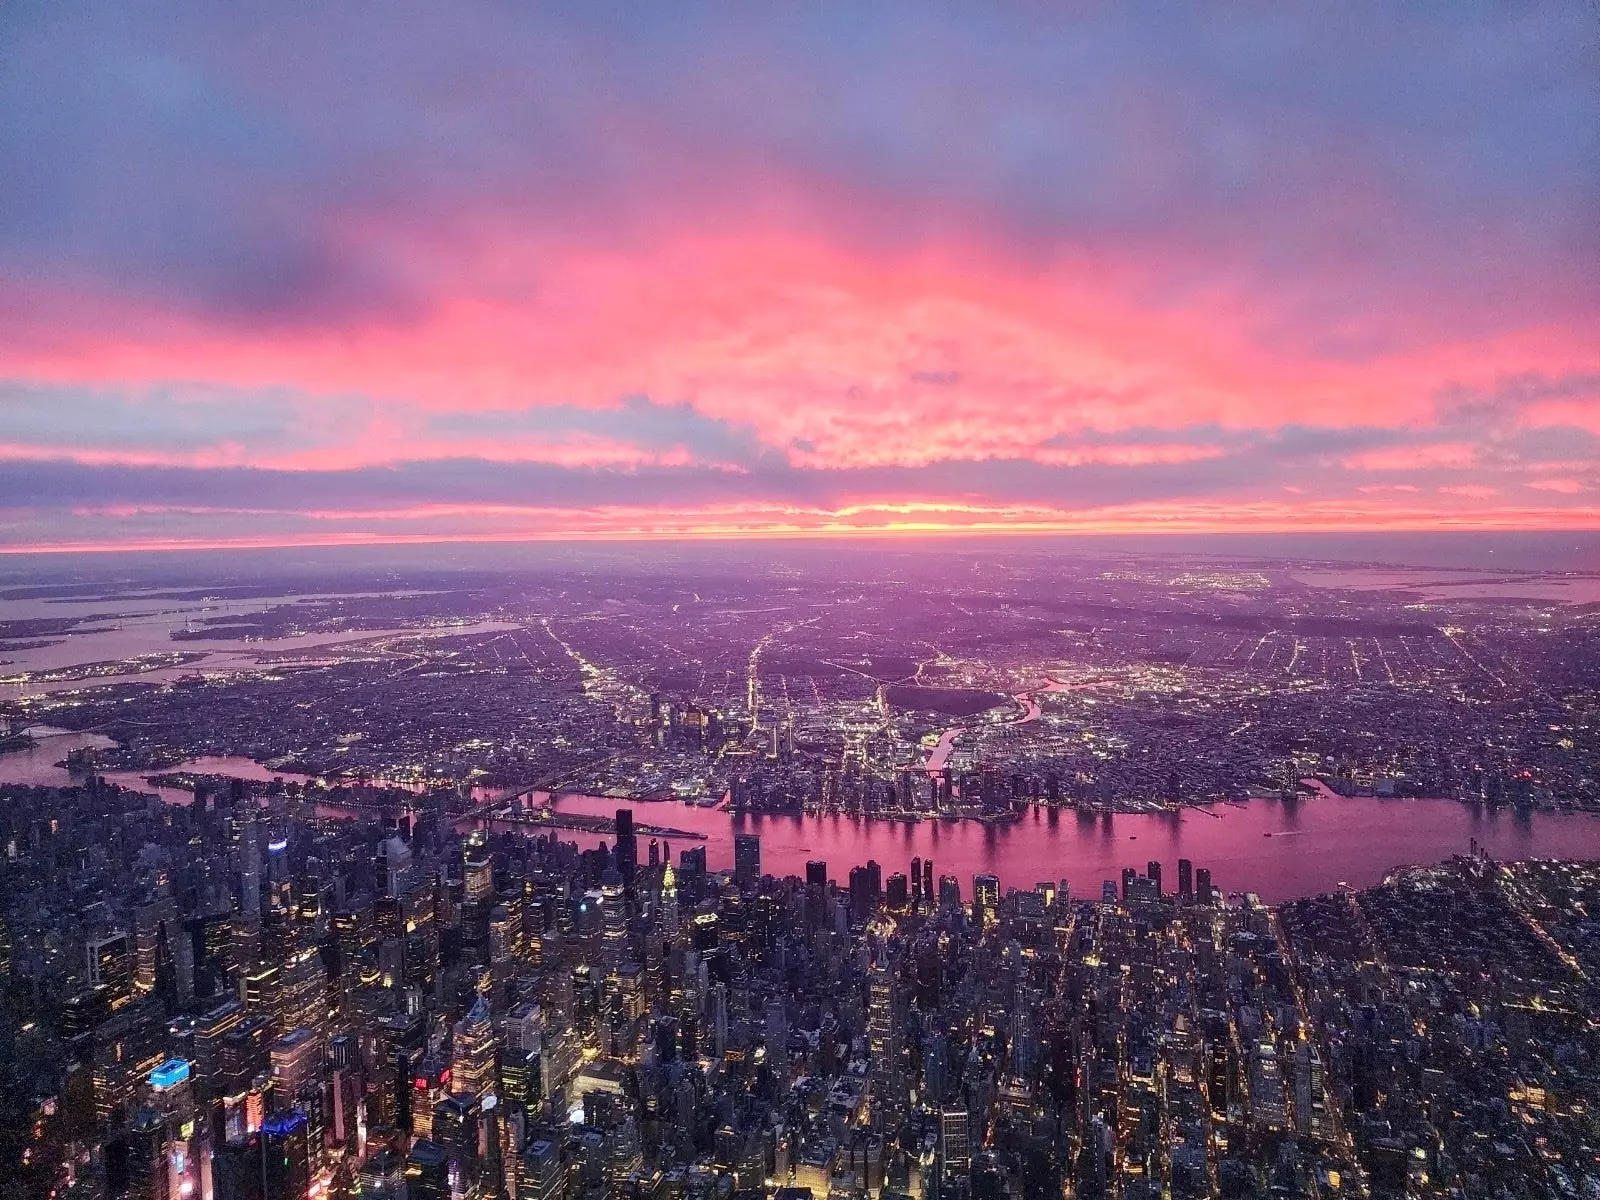 Pink skies over NYC from a plane.